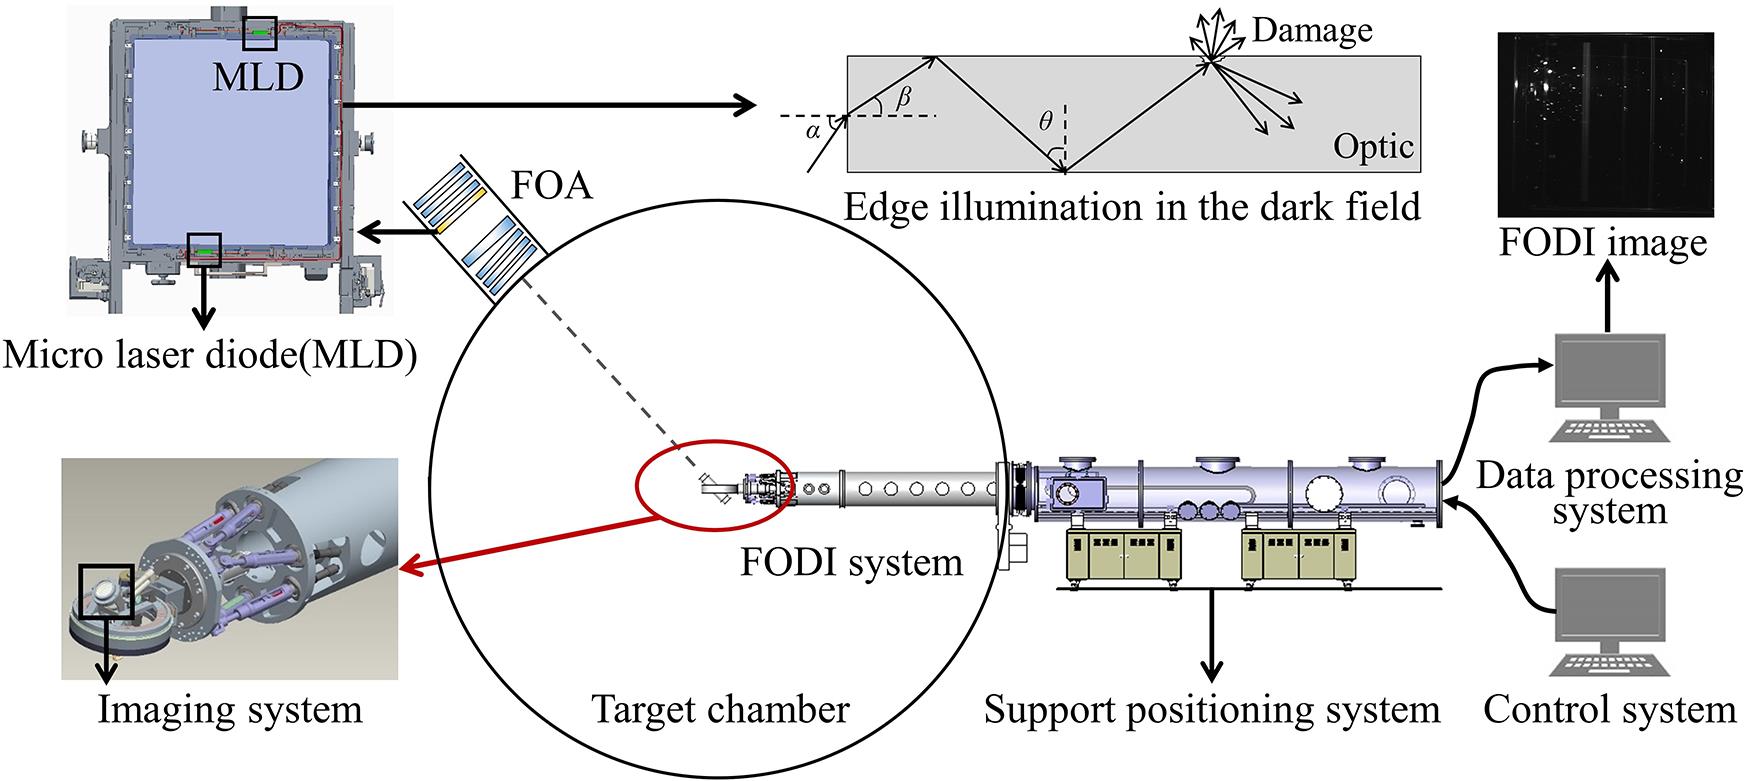 Schematic diagram of the methodology for online capturing images of optics (FODI images) by the FODI system.